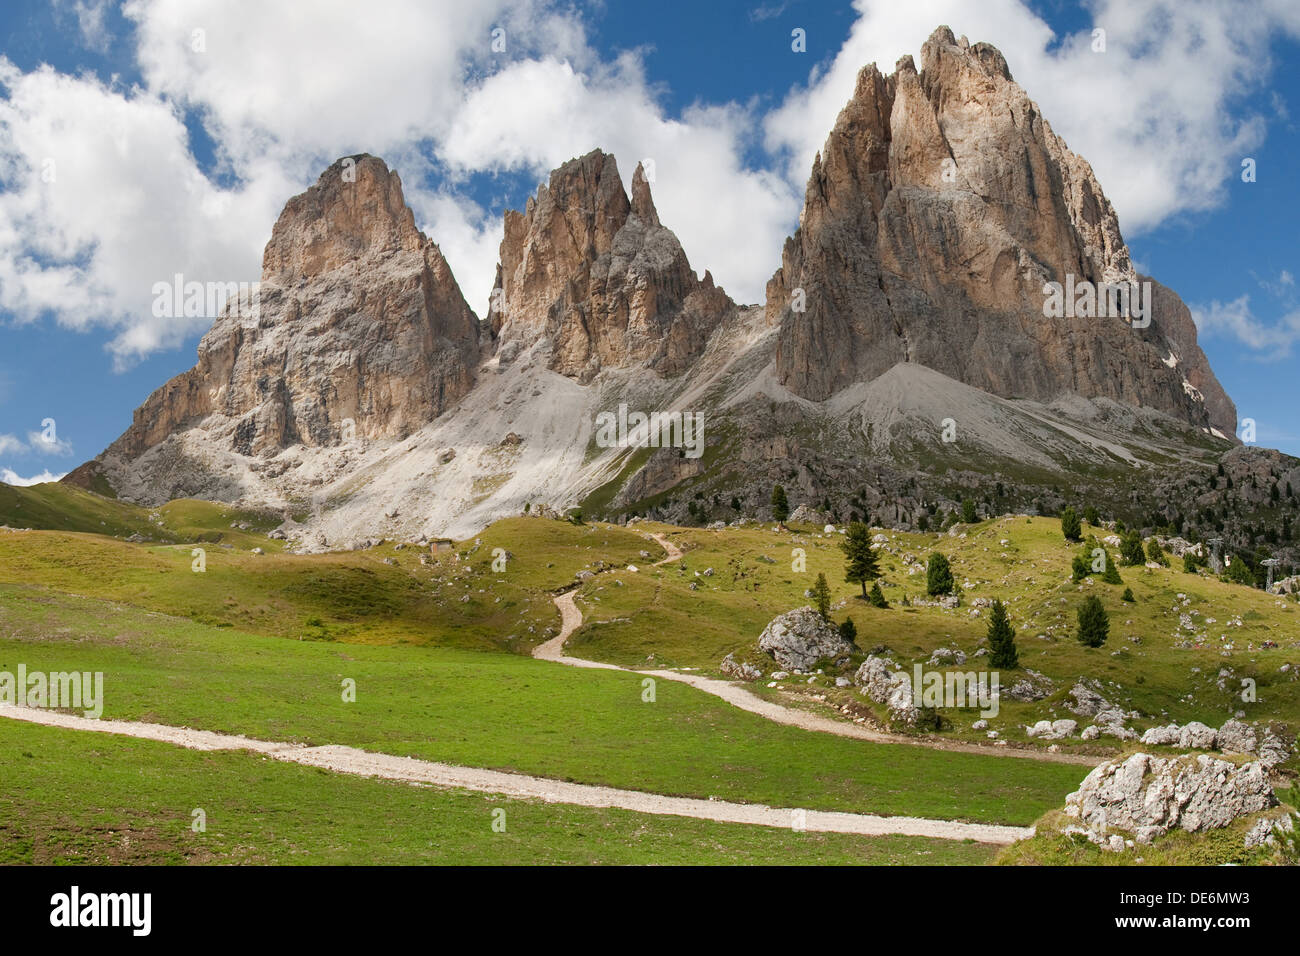 The Langkofel peaks (Sassolungo) from the Sella Pass in the Dolomites, Italy. Stock Photo